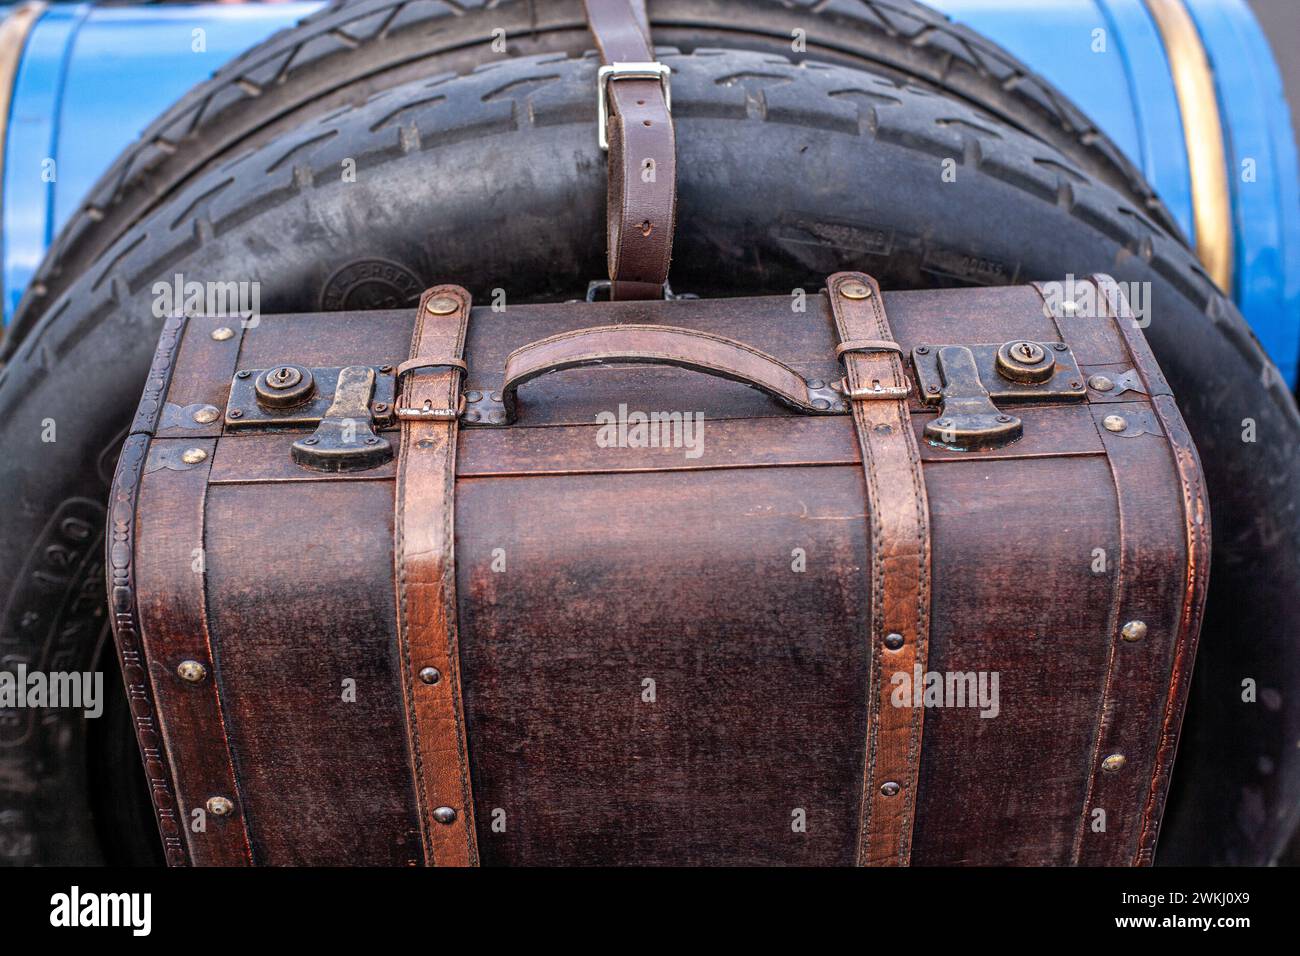 Spare wheel and suitcase on the rear of the car. Stock Photo